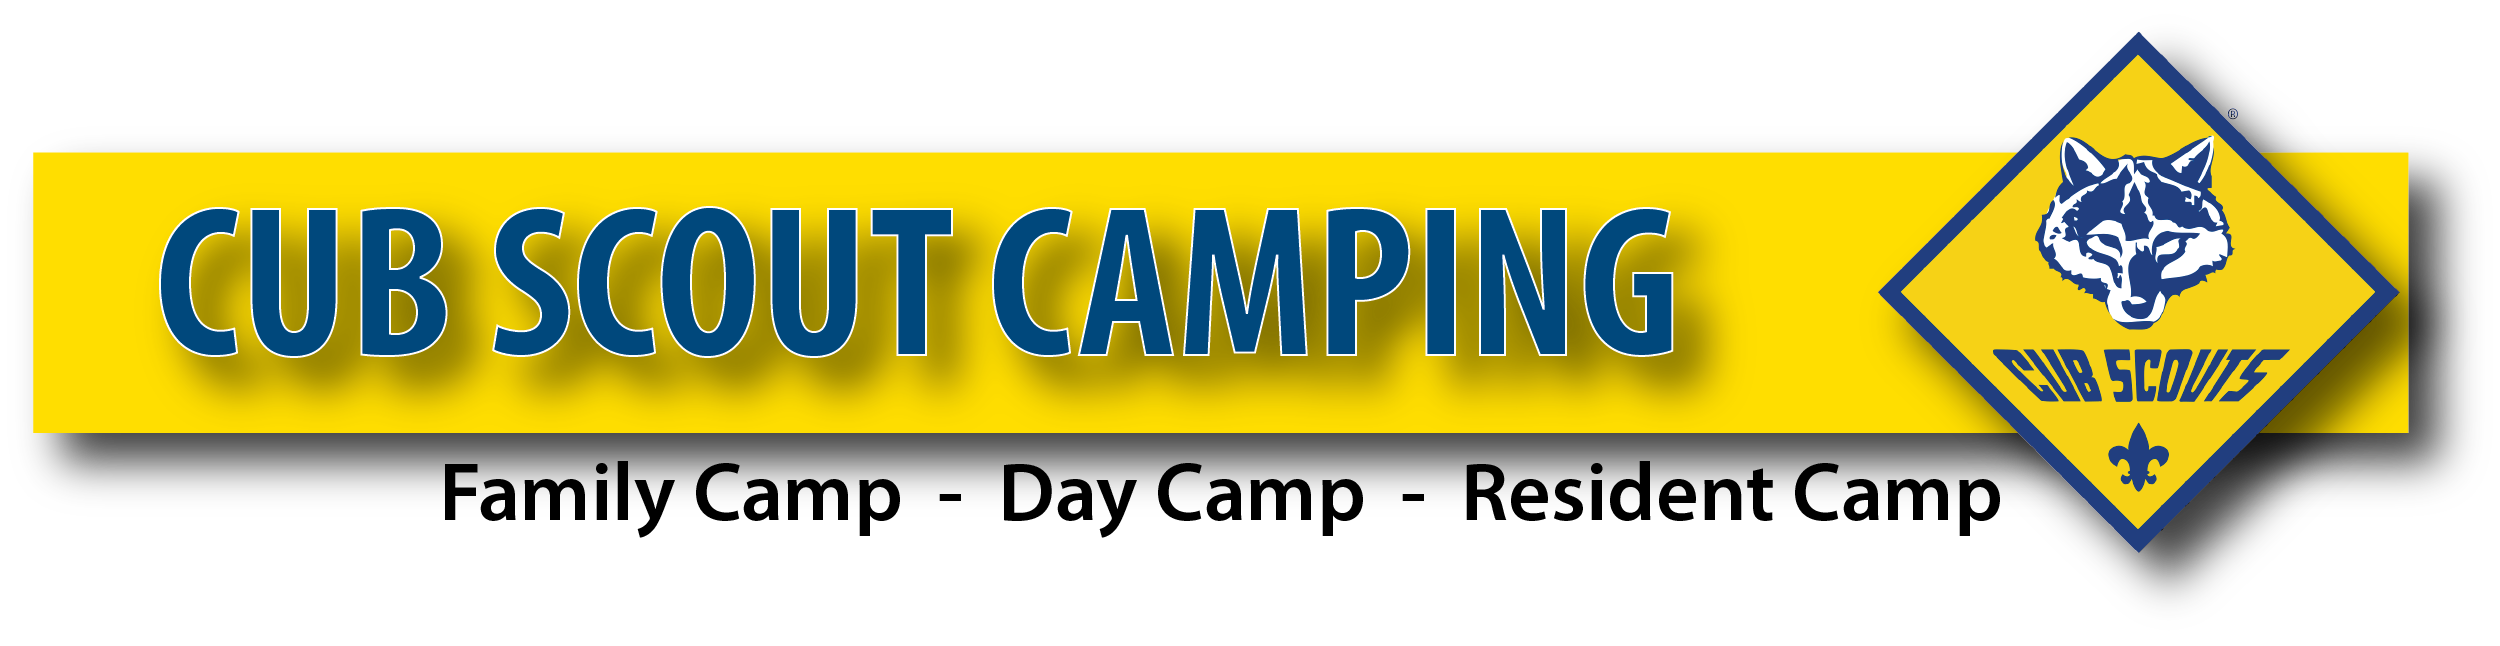 Cub Scout Camping Png Hdpng.com 2500 - Cub Scout Camping, Transparent background PNG HD thumbnail